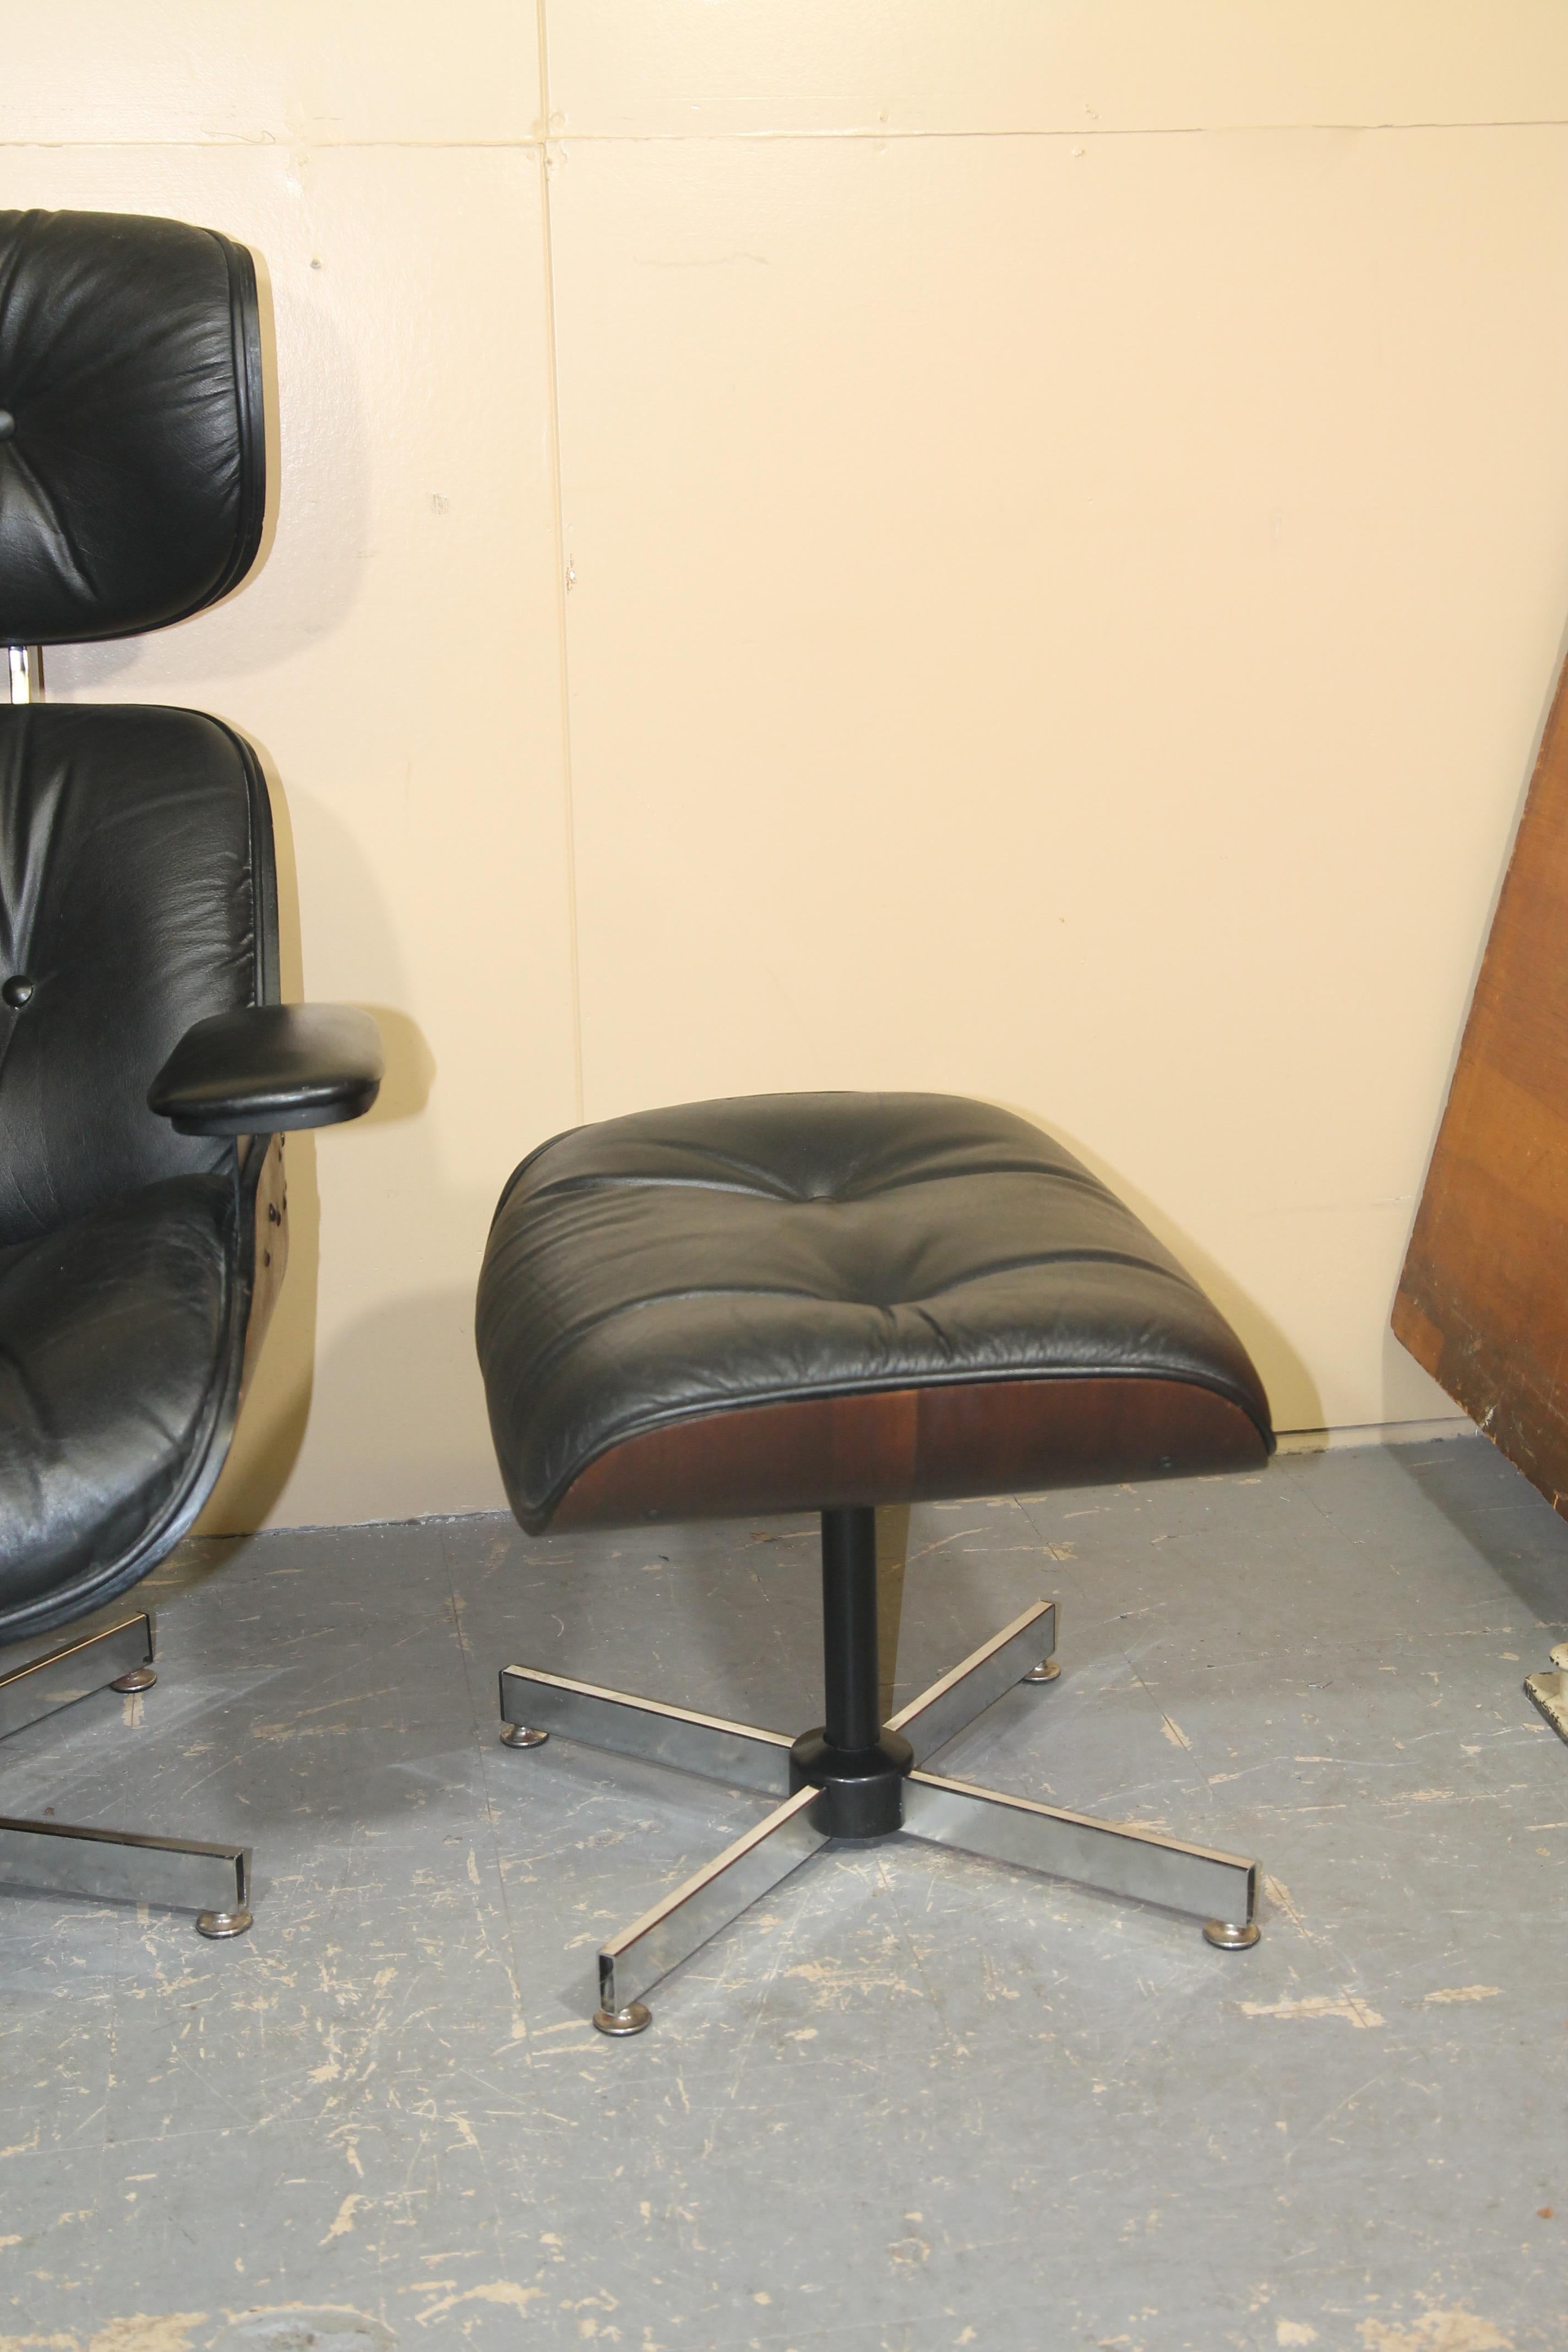 American Plycraft Chair and Ottoman in the Style of the Eames 670 Lounge Chair